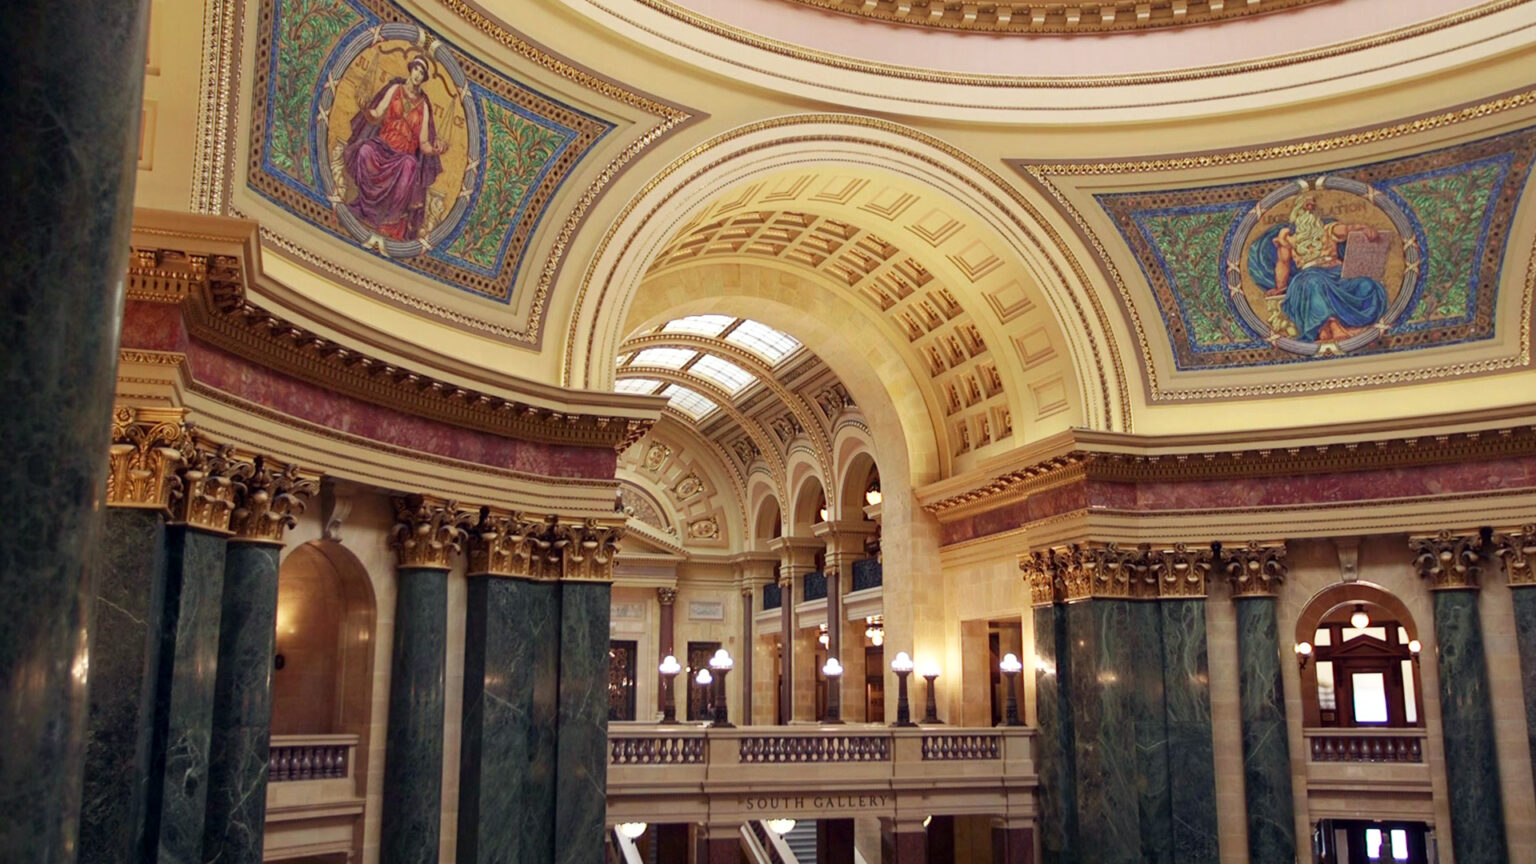 Two mosaics depicting Classical figures — one holding a scale and labeled Justice and the other holding a tablet and labeled Legislation — are seen in two quadrants of the interior walls of a rotunda inside a building with marble pillars and other masonry in a Neoclassical design.